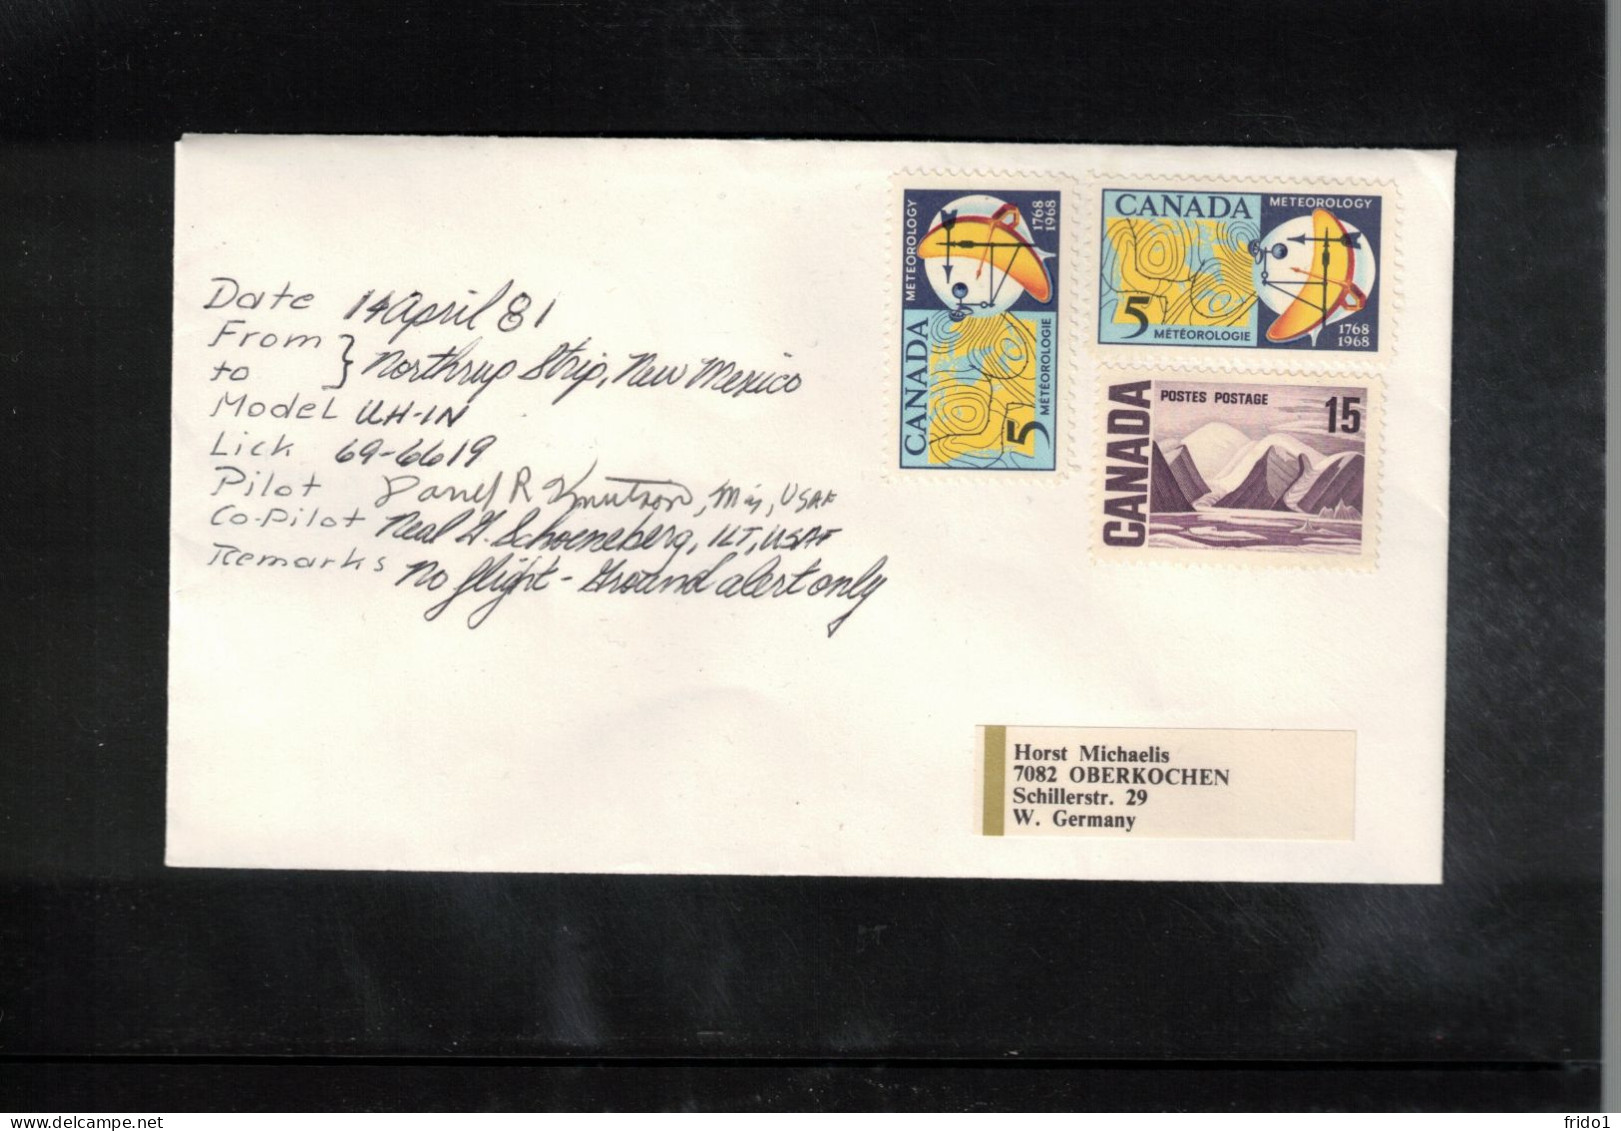 USA 1981 Space / Weltraum Space Shuttle - Department Of The Air Force Interesting Signed Cover - Etats-Unis